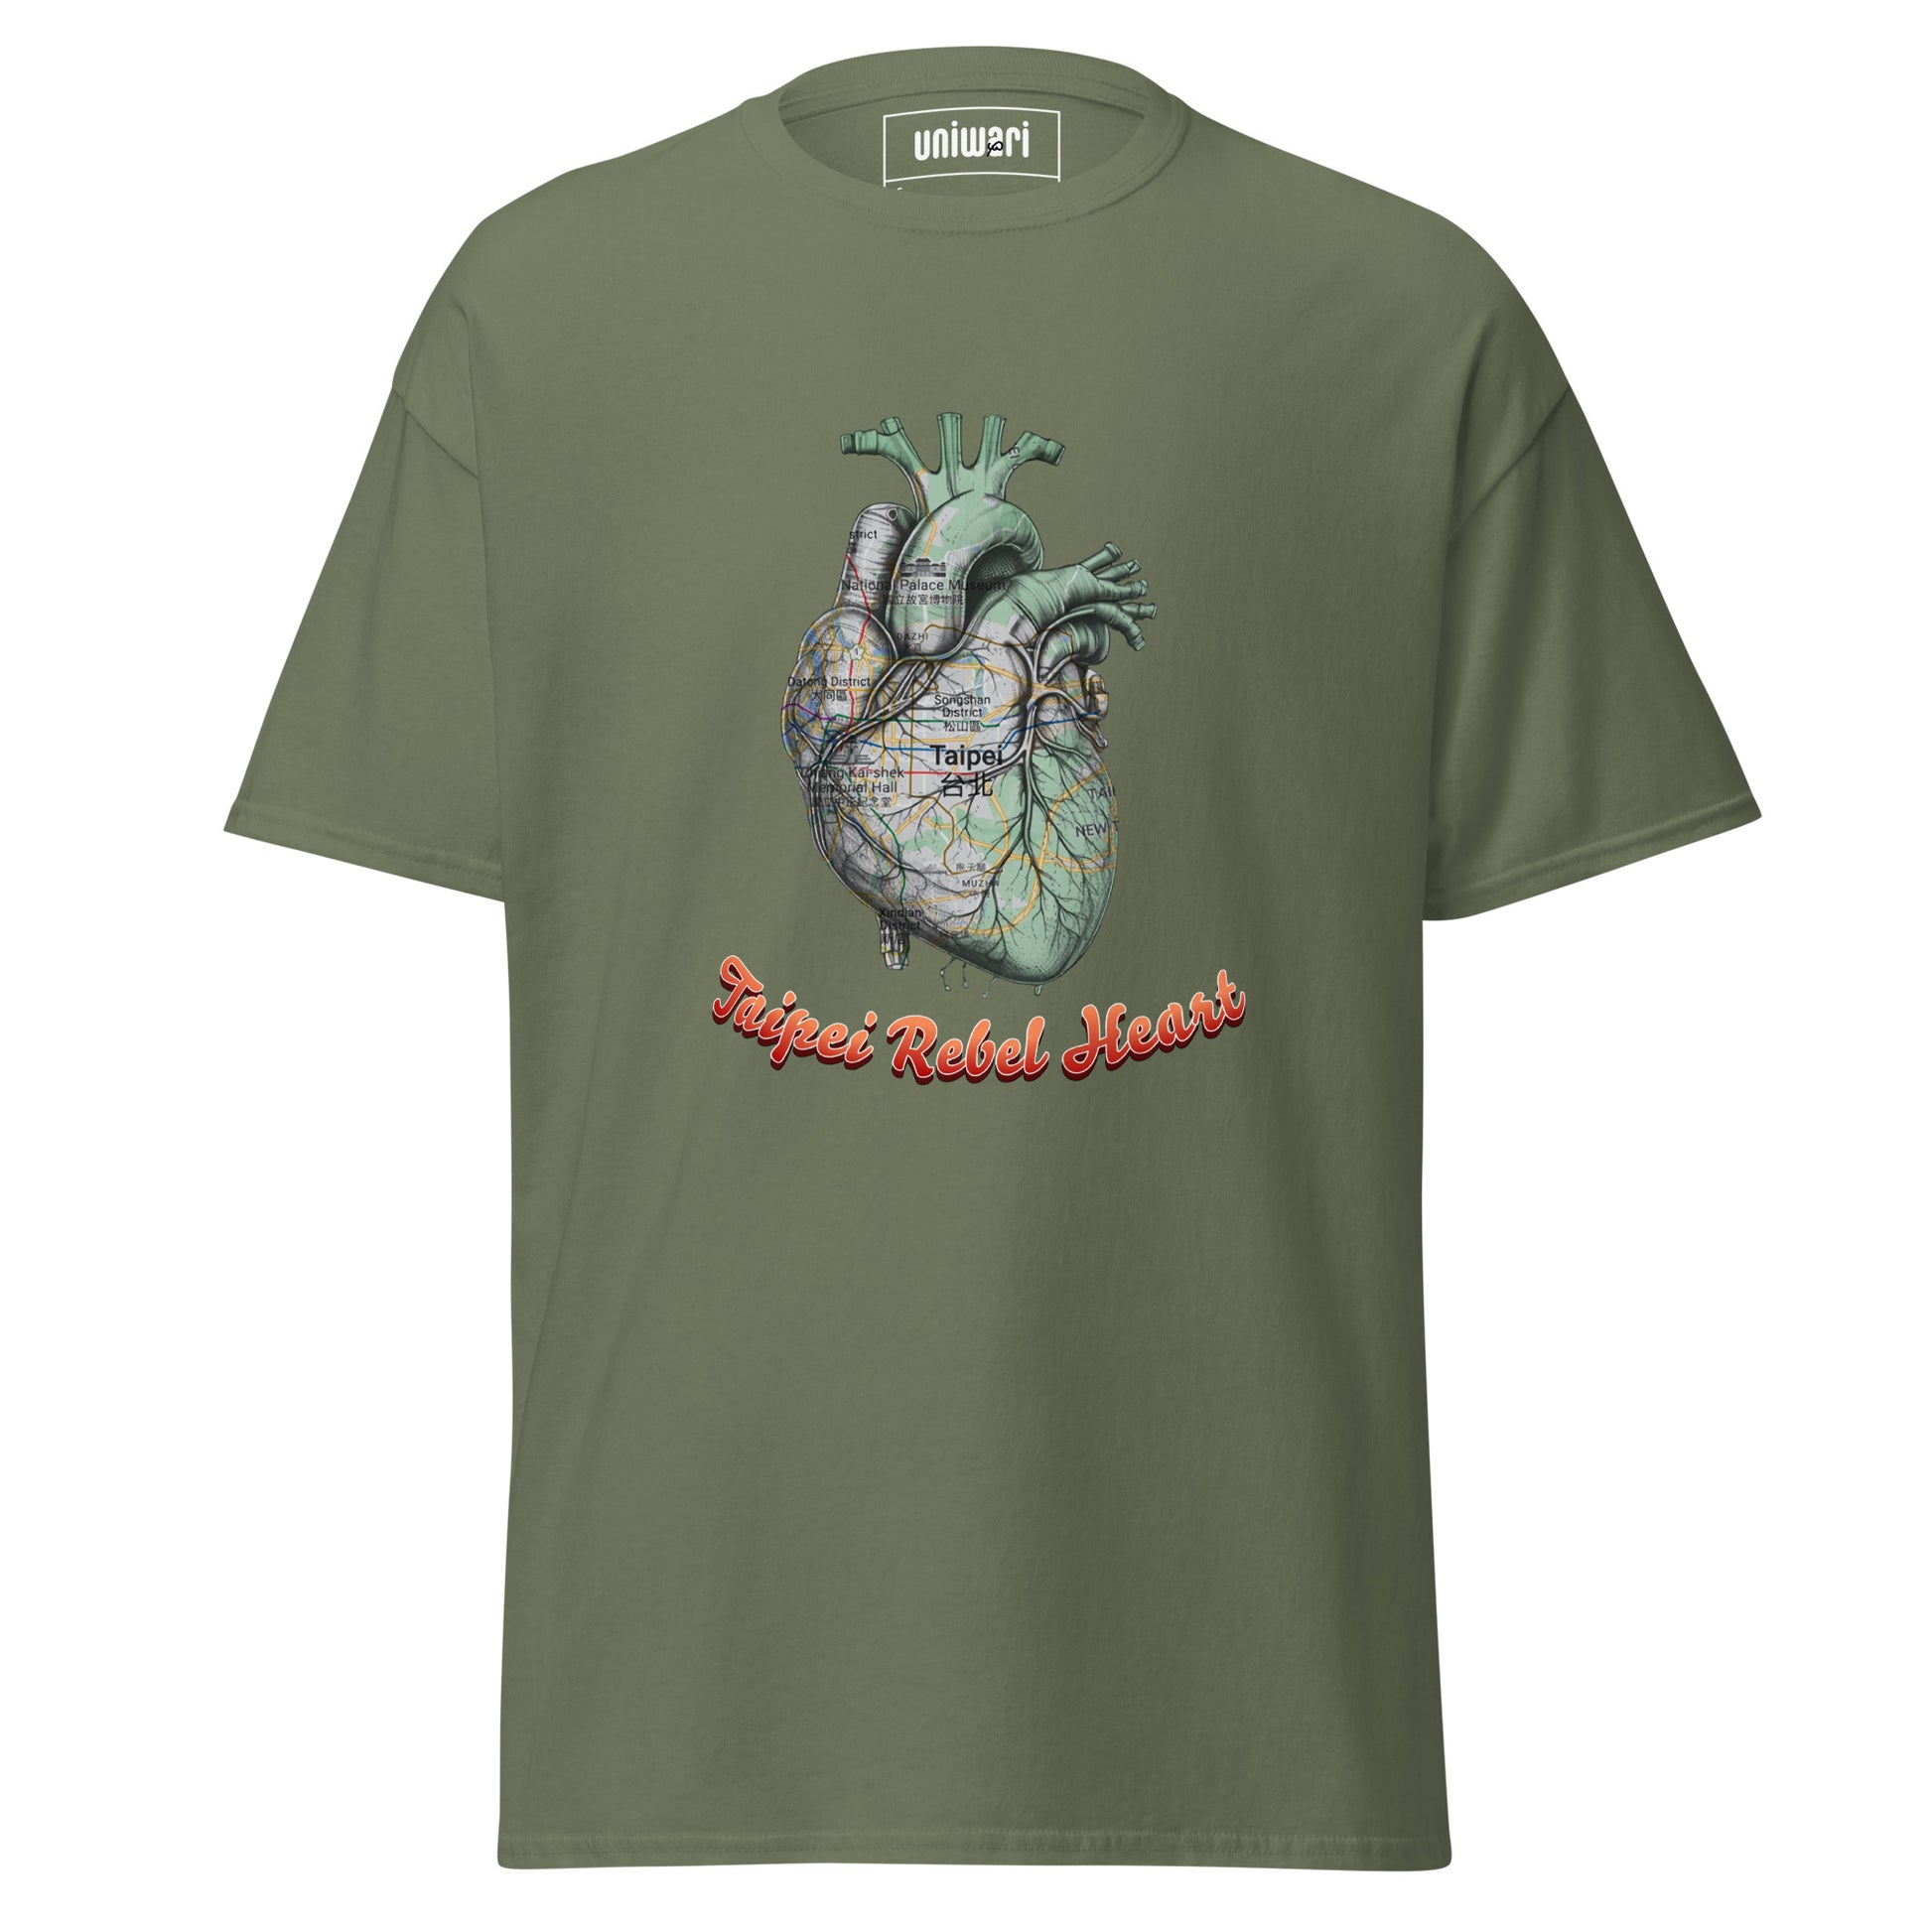 Green High Quality Tee - Front Design with a Heart Shaped Map of Taipei and a Phrase "Taipei Rebel Heart" print